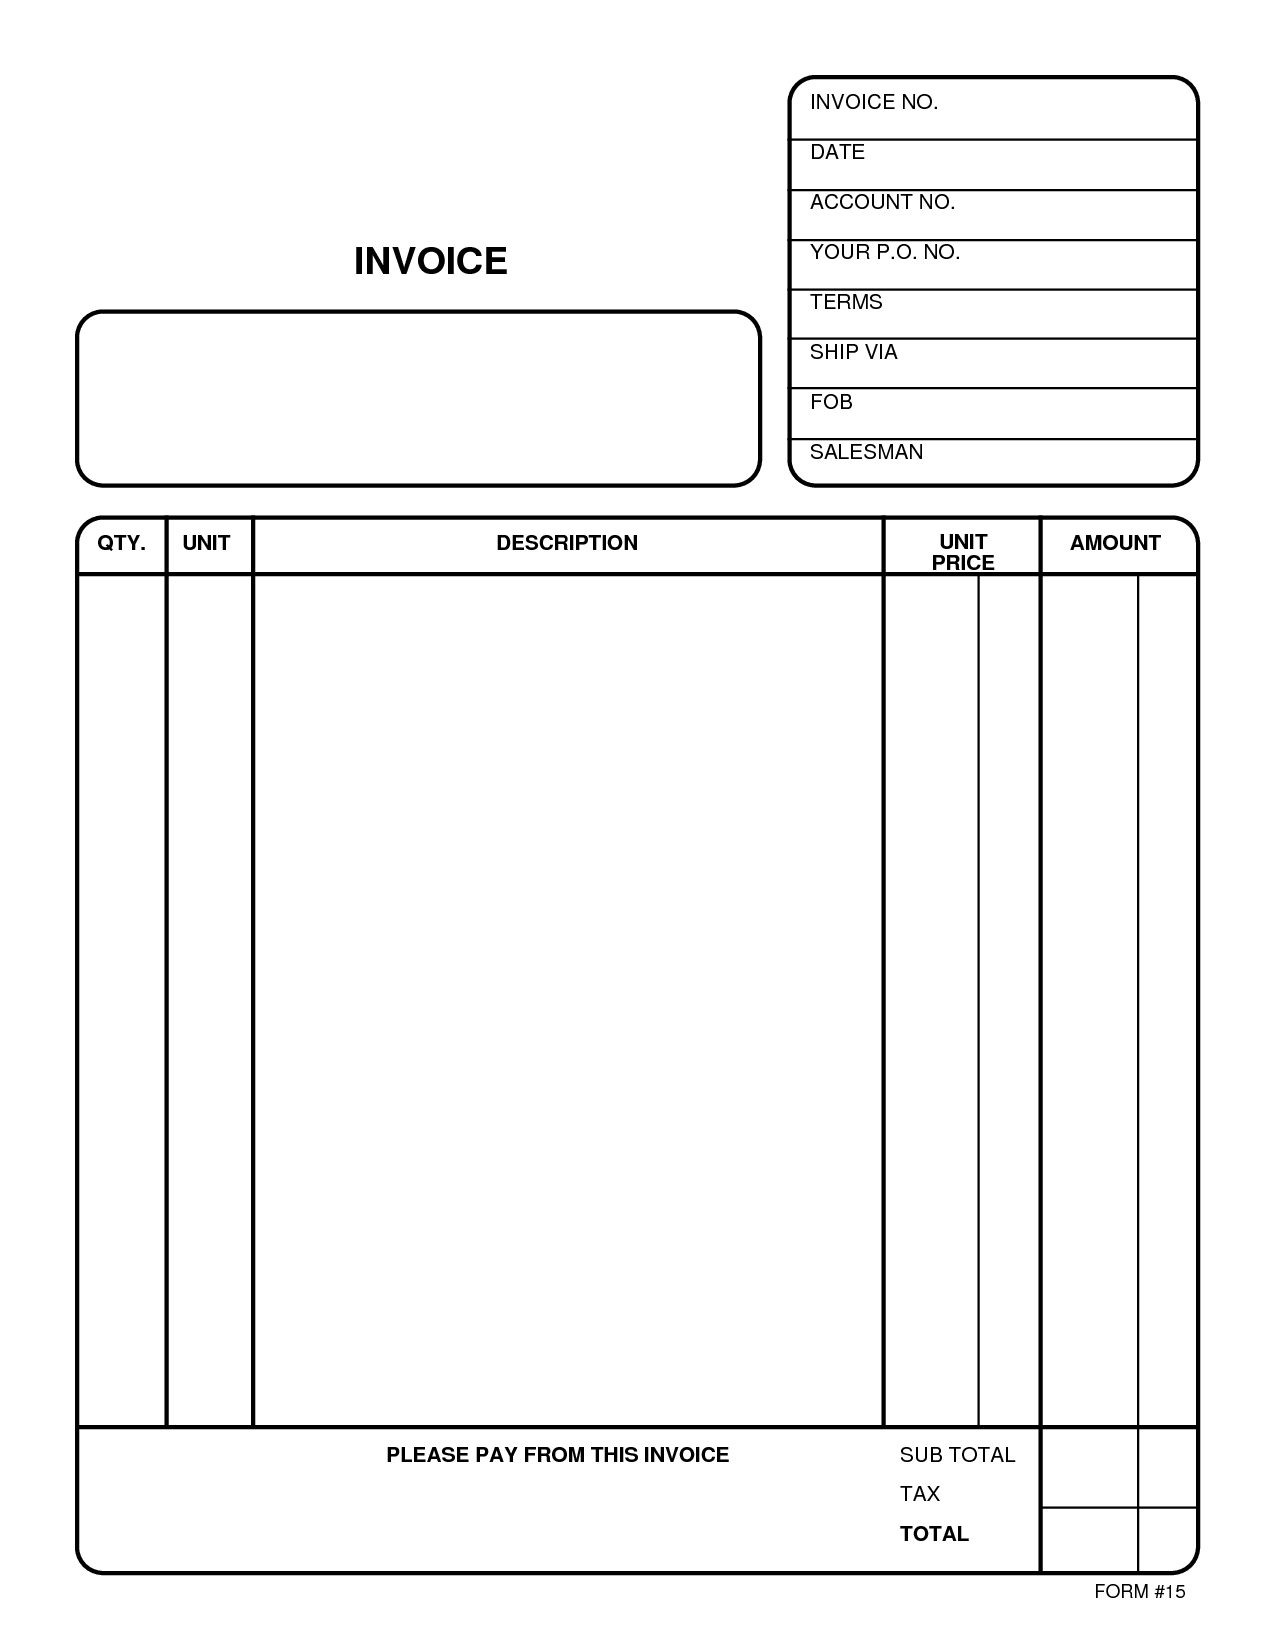 blank invoice online free resume samples references free invoices templates online